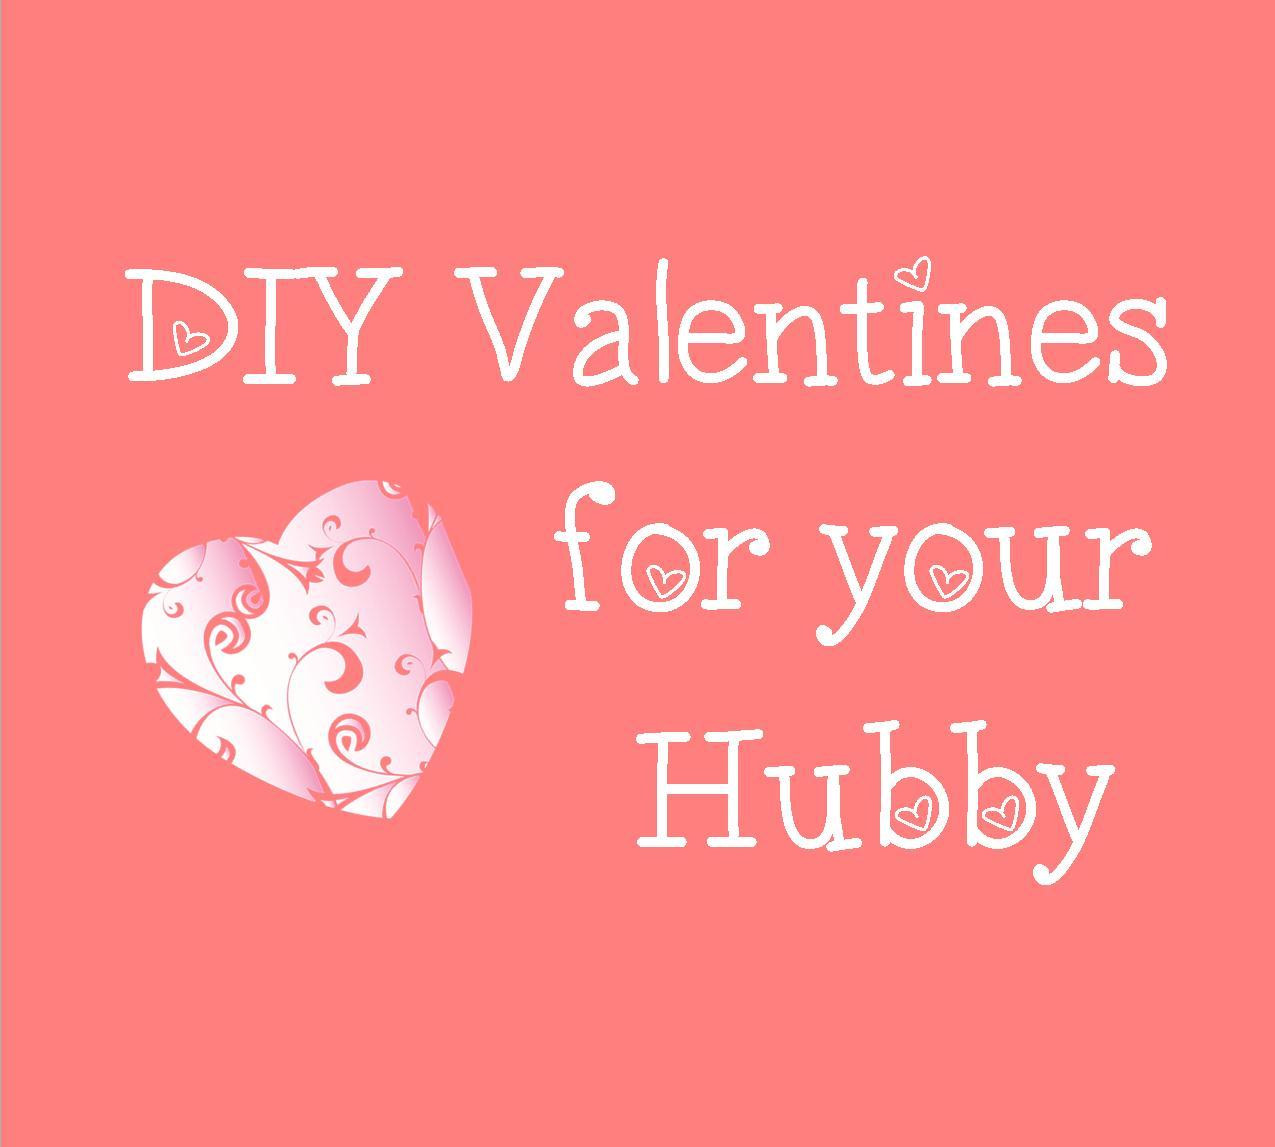 Valentines Gift Ideas For Your Husband
 Crafty WI Mama Valentines for the Hubby